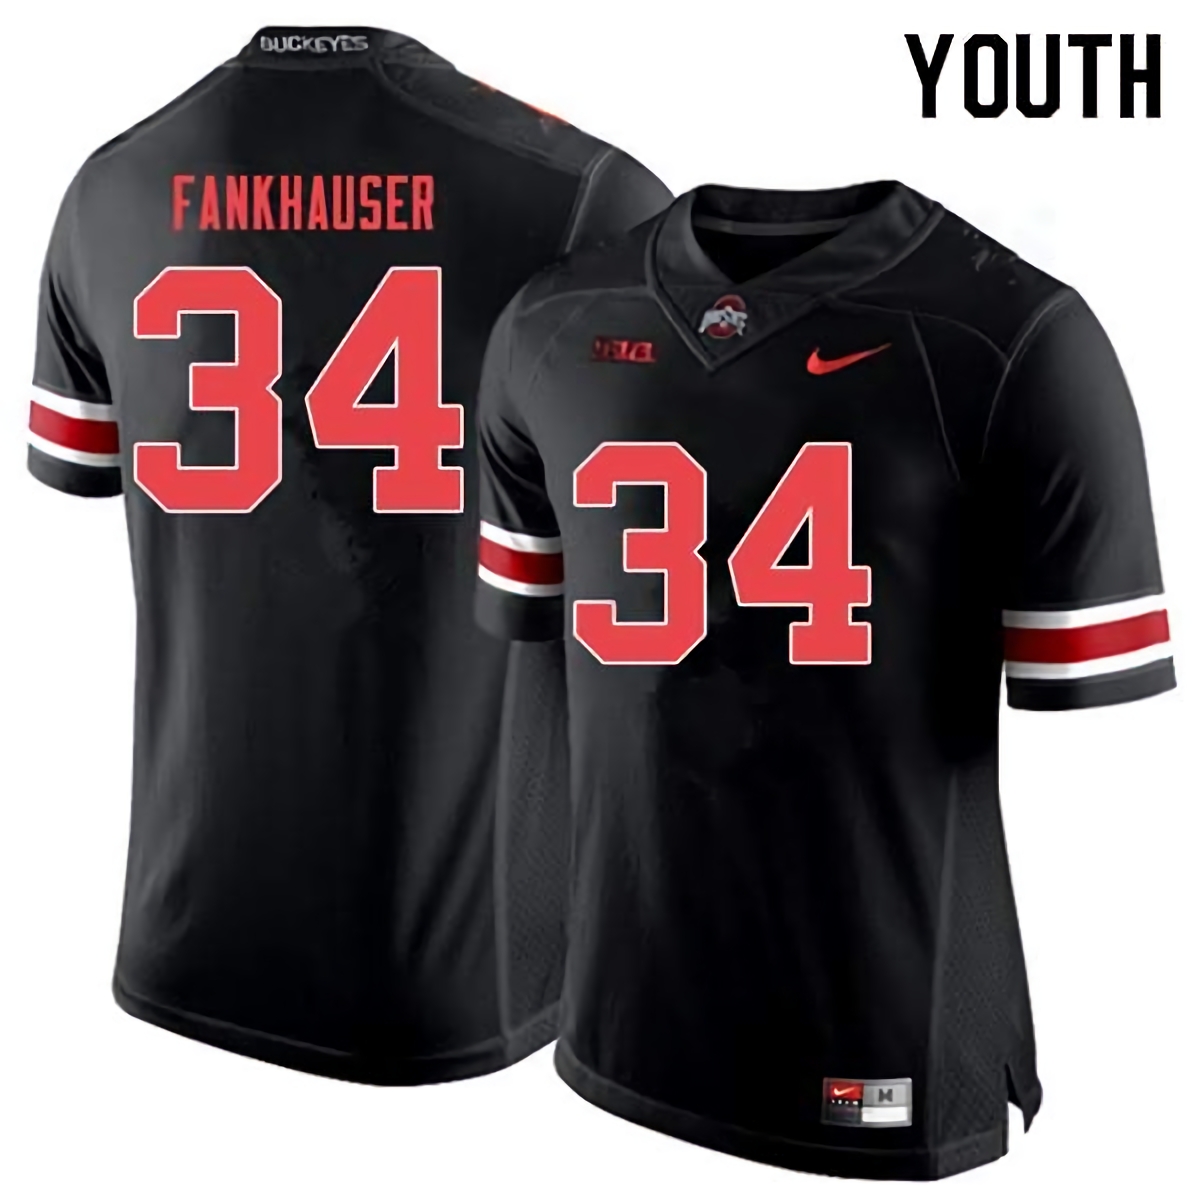 Owen Fankhauser Ohio State Buckeyes Youth NCAA #34 Nike Black Out College Stitched Football Jersey SIX4056OD